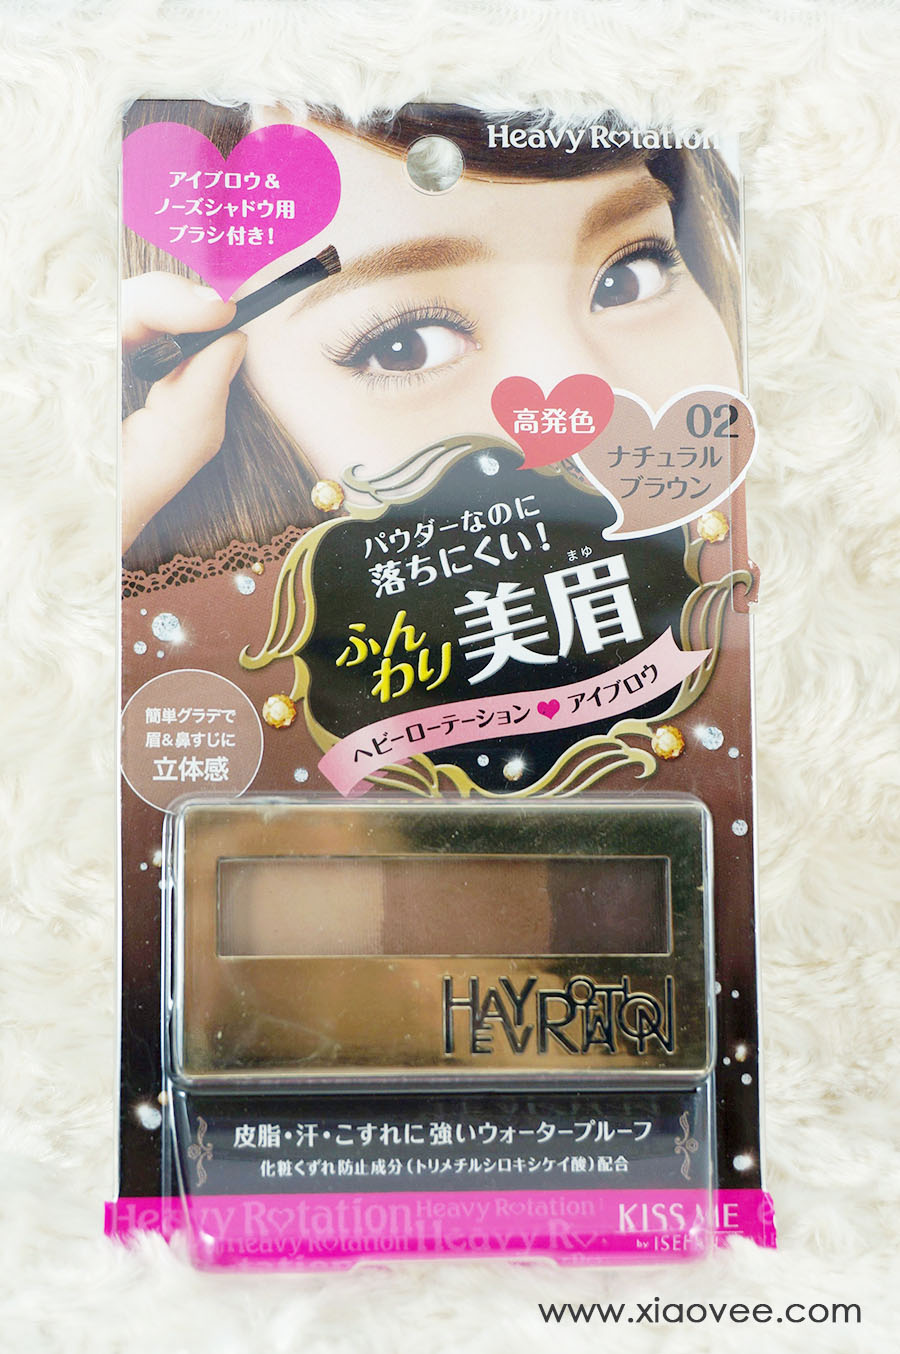 Heavy rotation Powder Eye Brow Nose Shadow review